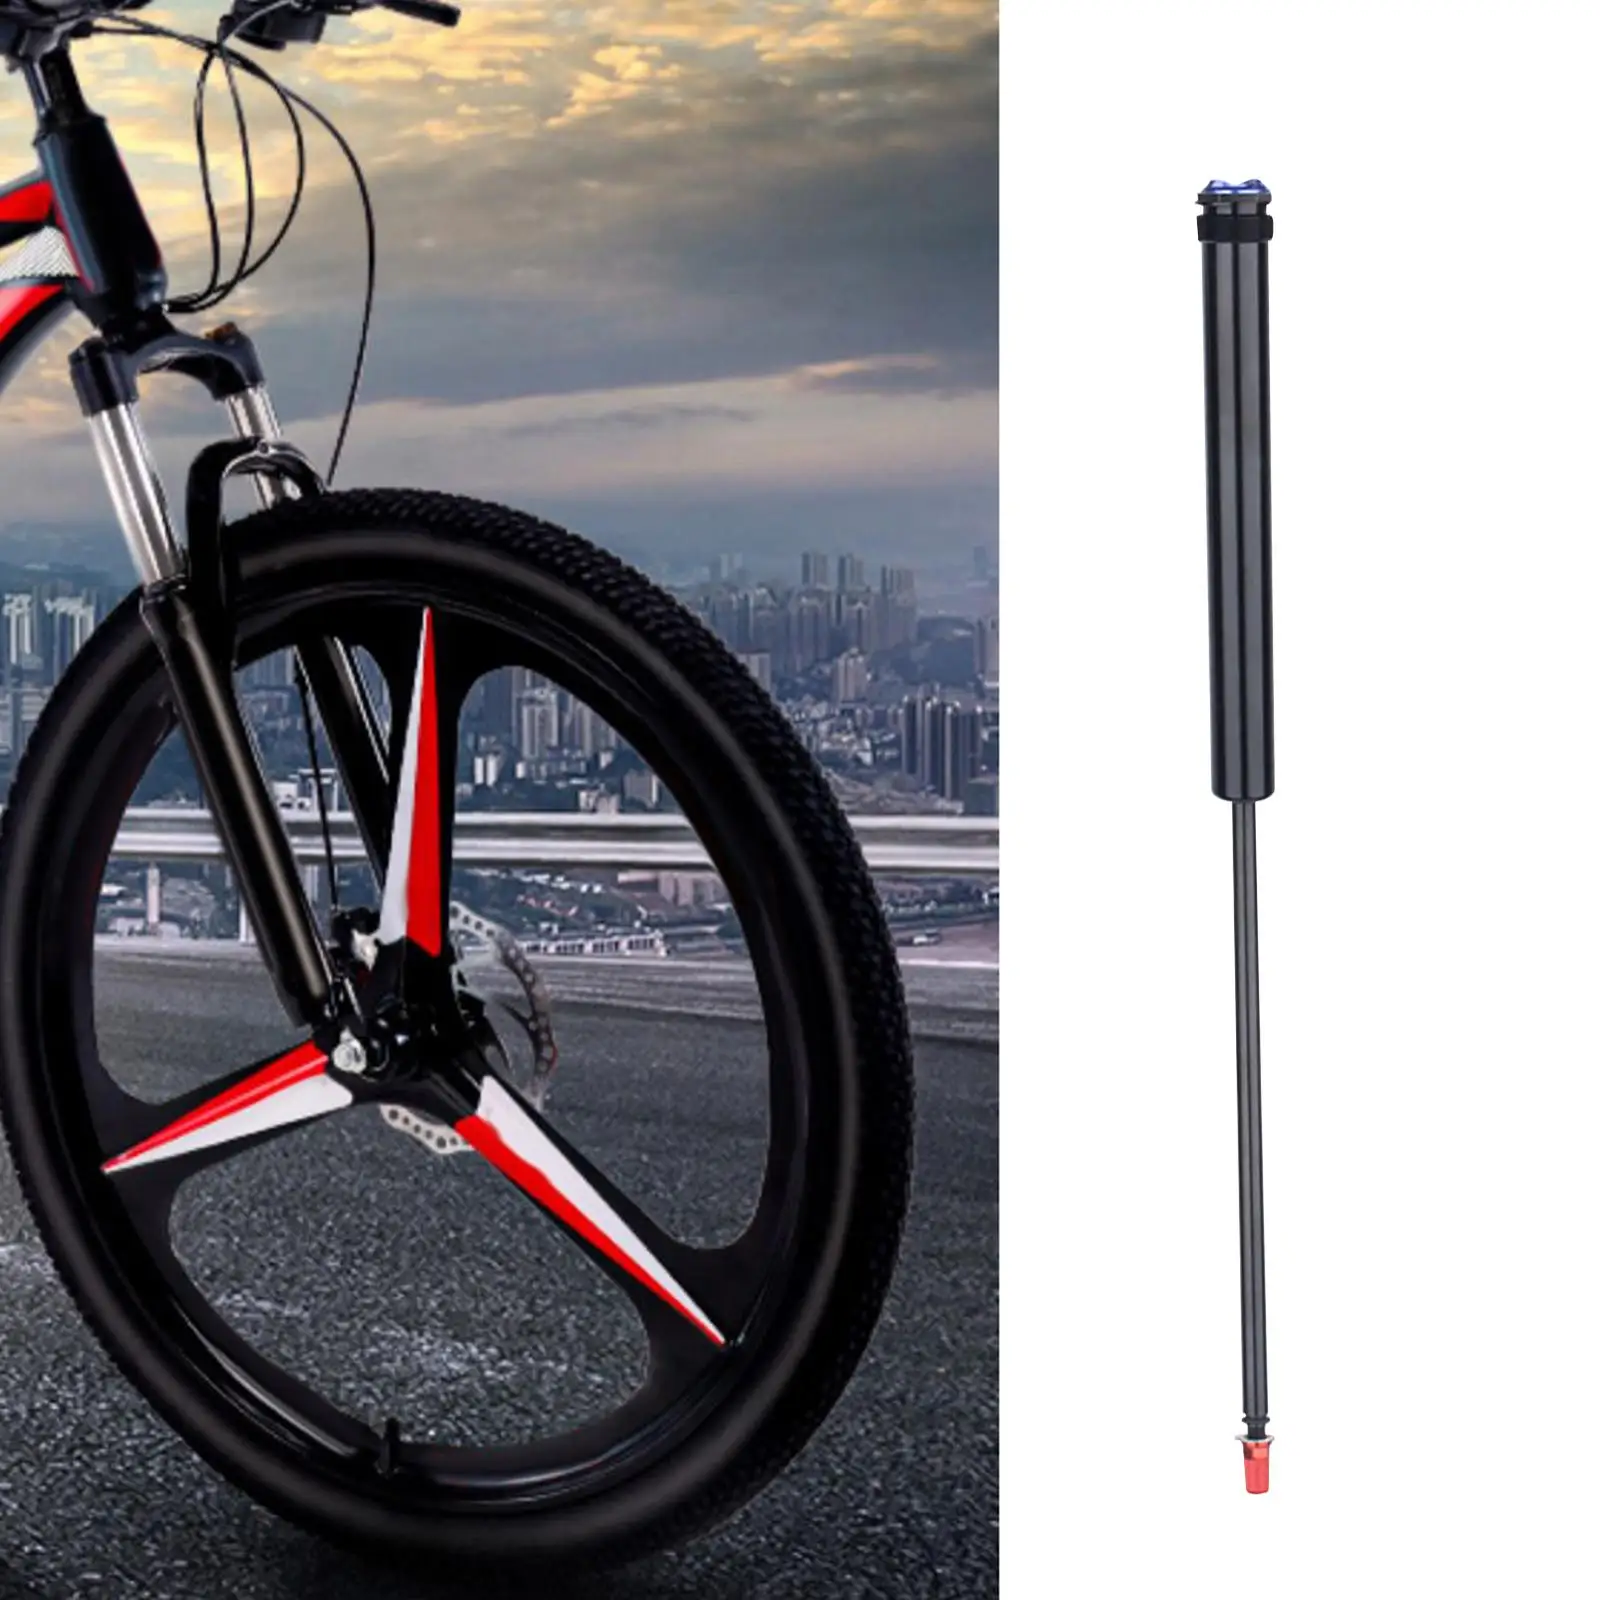 Bicycle Hydraulic Damping Rod Shoulder Control Bike Front Fork Repair Rod Portable for Most Mountain Bikes Sturdy Aluminum Alloy